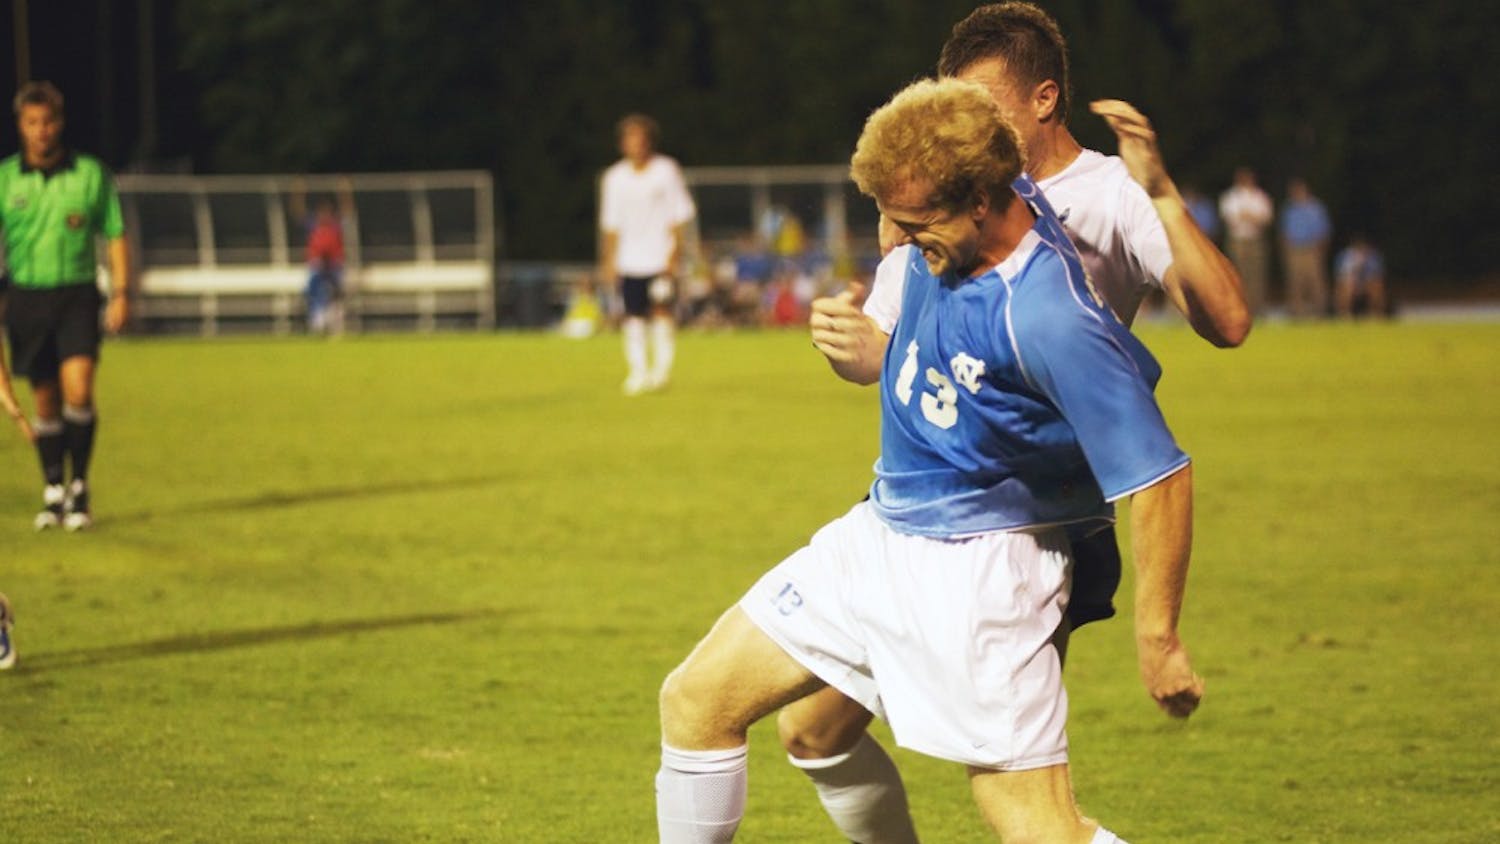 Josh Rice, who scored the game-winning goal against UNC-Wilmington in the last minute of UNC’s first exhibition game, scored twice for the Tar Heels in the preseason. North Carolina will open its regular season Friday in an NCAA College Cup semifinals rematch against Akron.